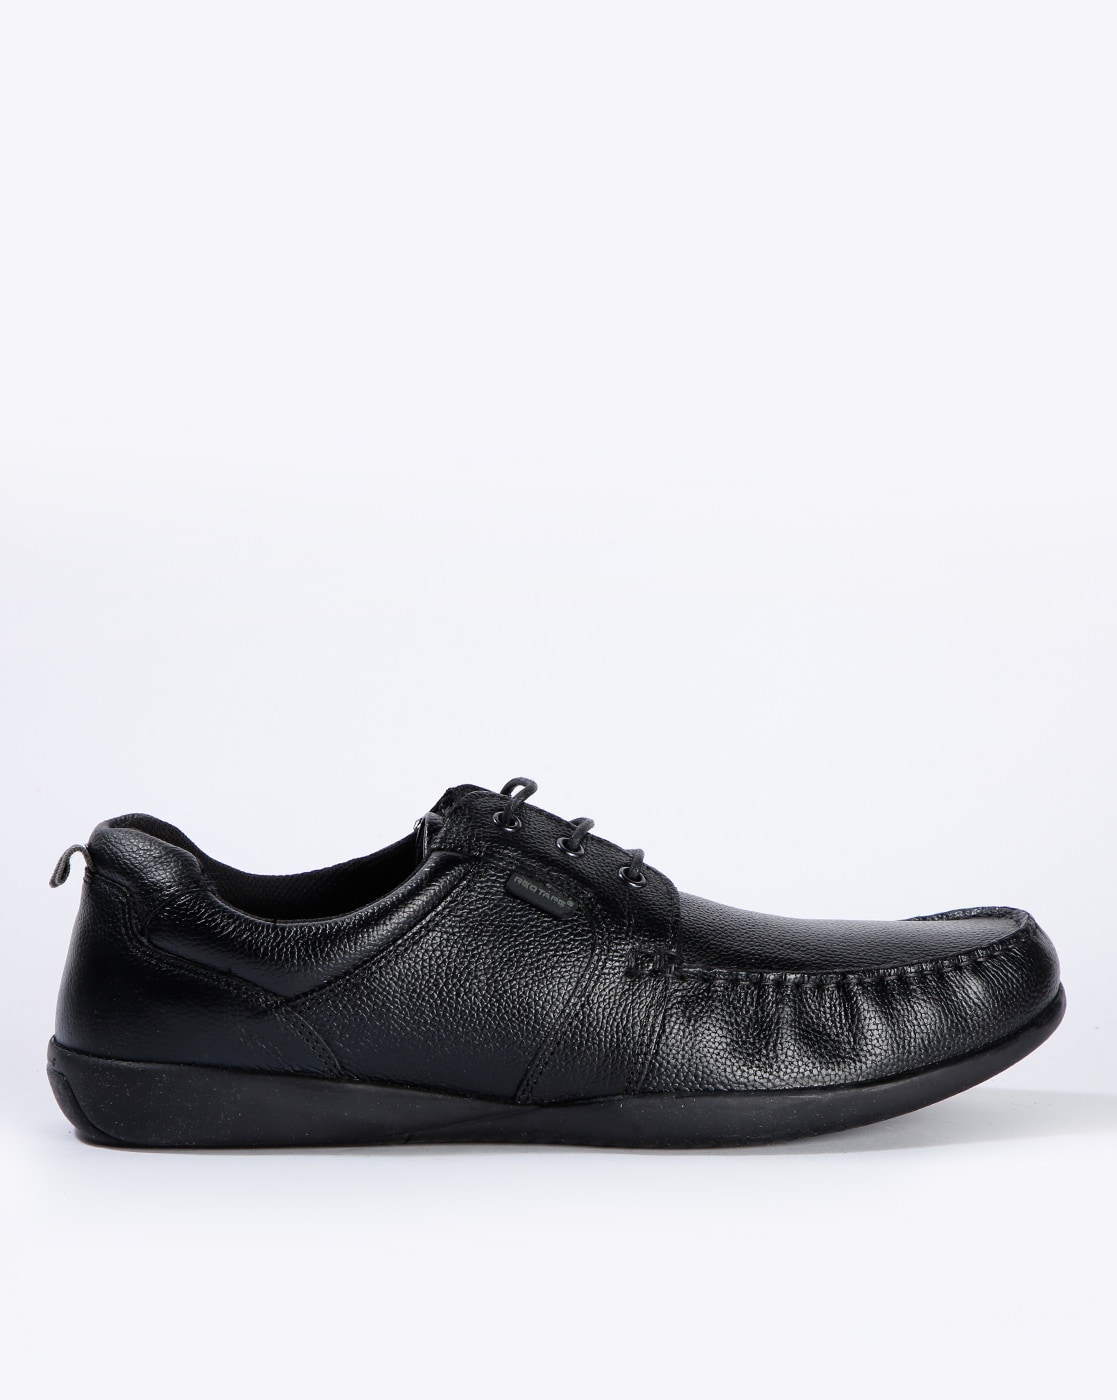 red tape black derby shoes